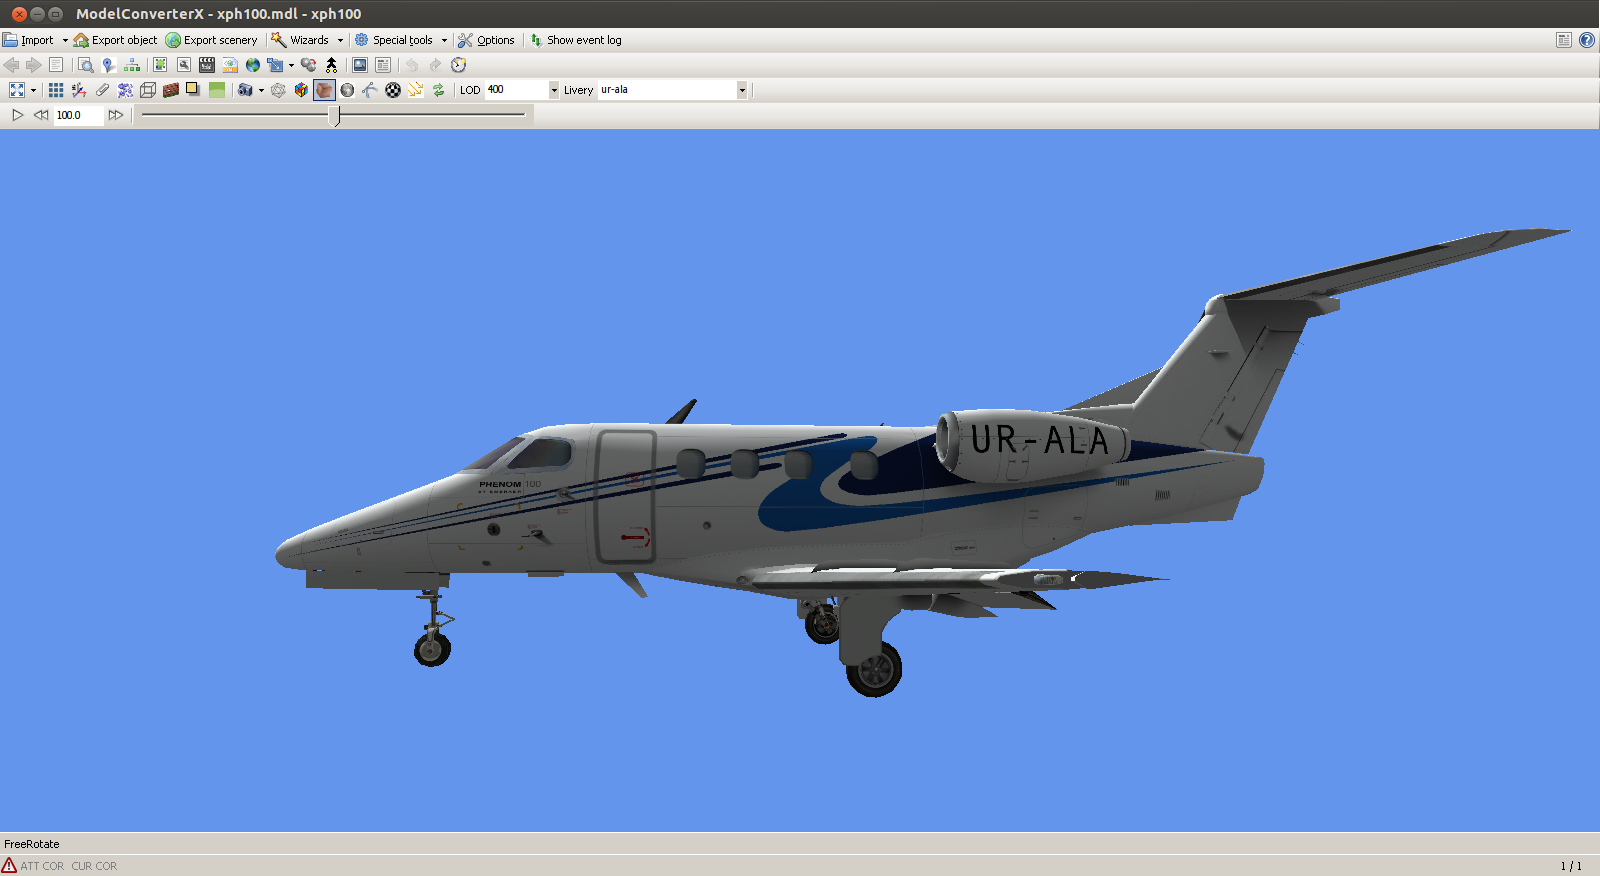 FSX FeelThere - Embraer Phenom 100 hack tool free